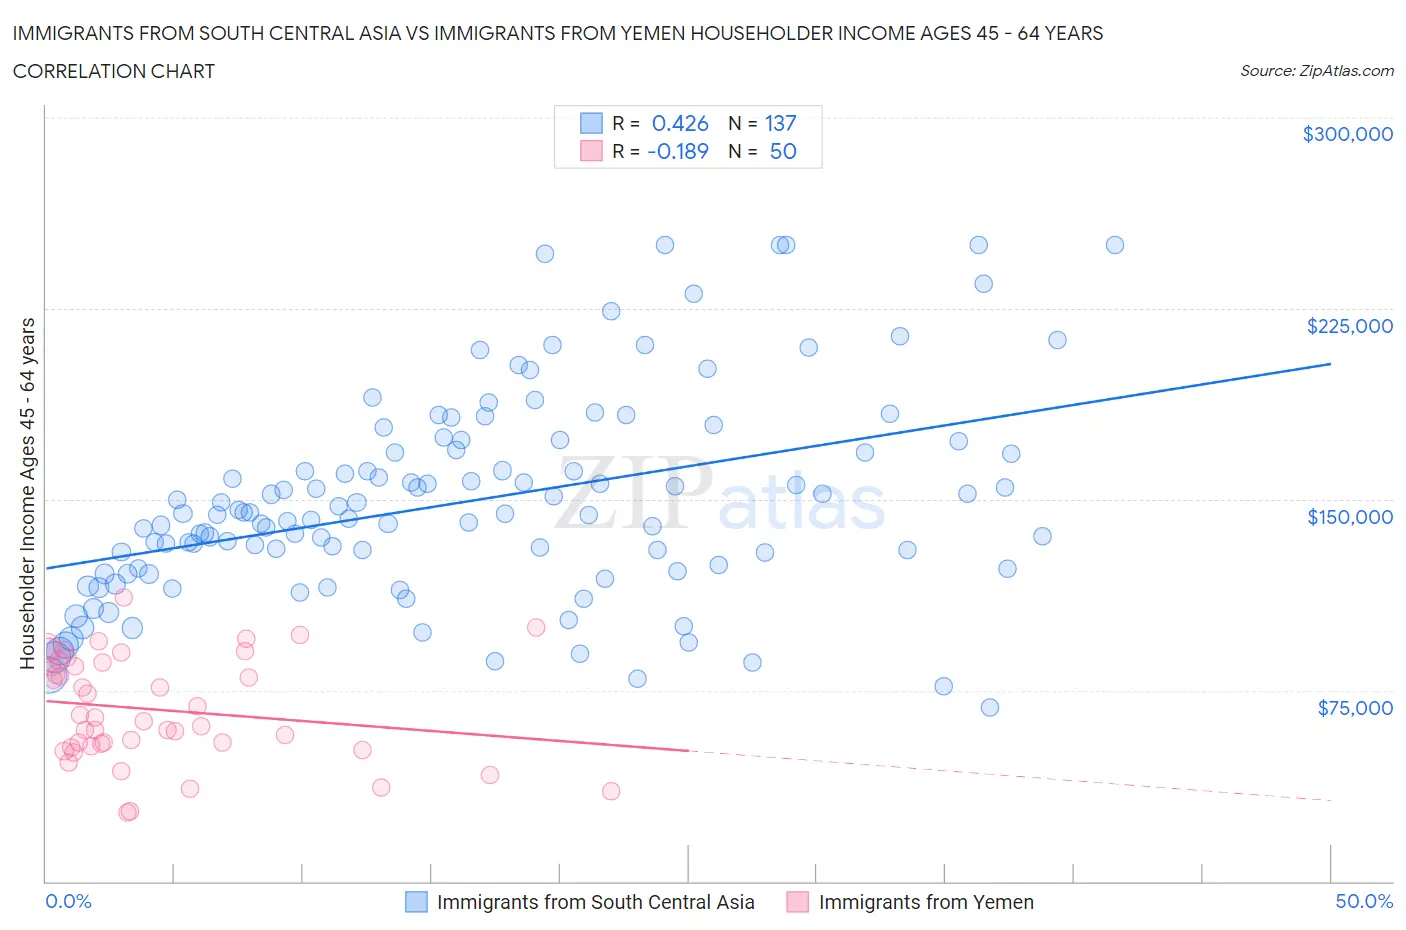 Immigrants from South Central Asia vs Immigrants from Yemen Householder Income Ages 45 - 64 years